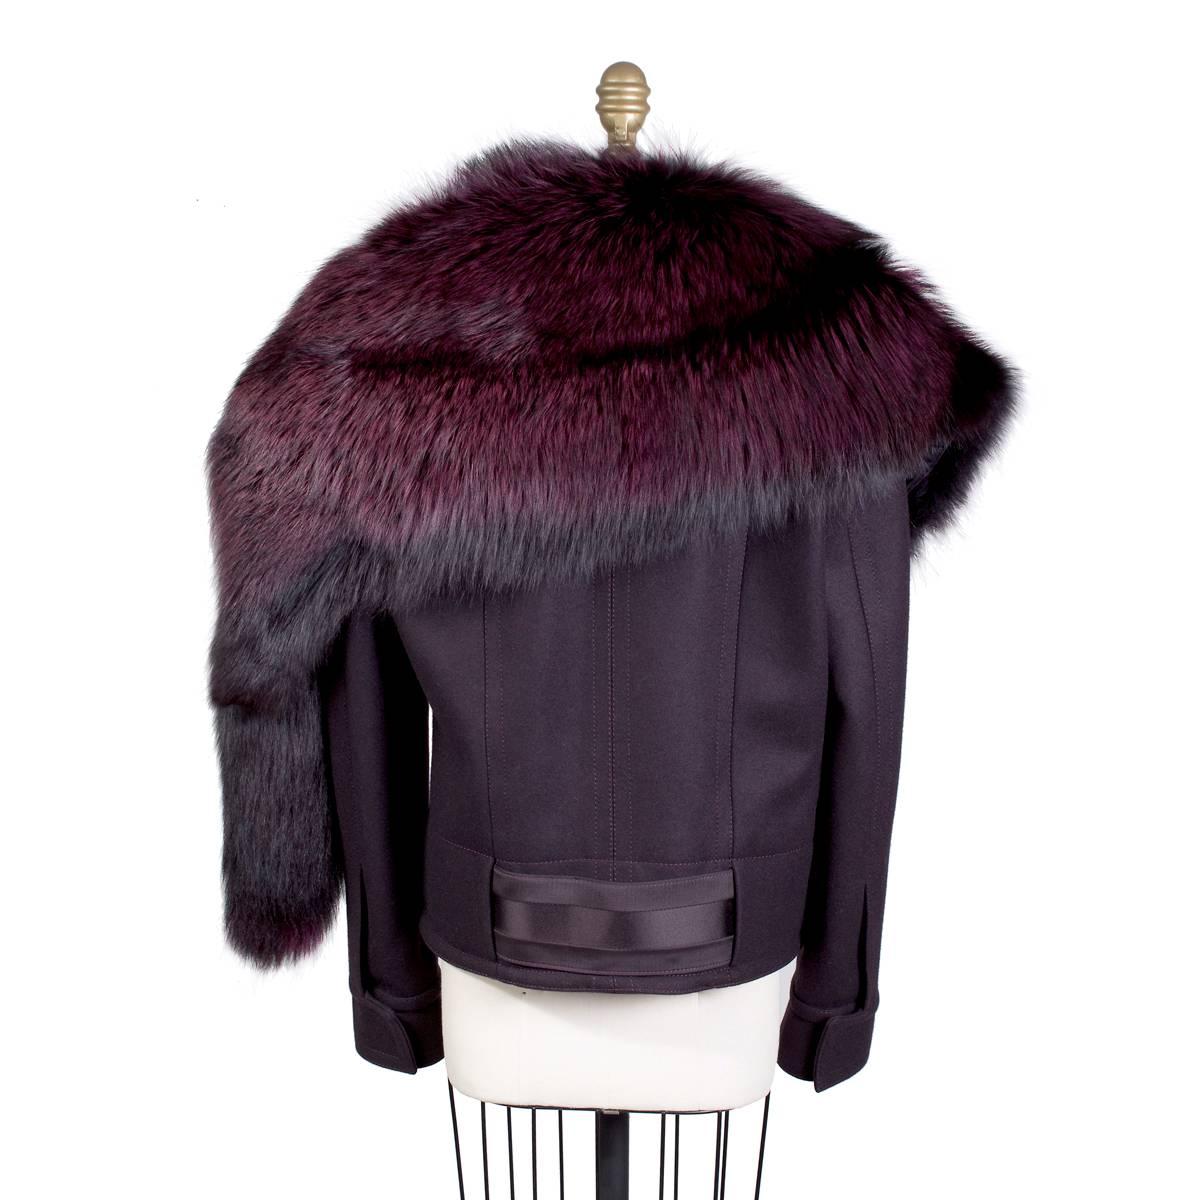 Black Tom Ford for Gucci Cropped Wool Jacket with Detachable Fur, Fall 2004